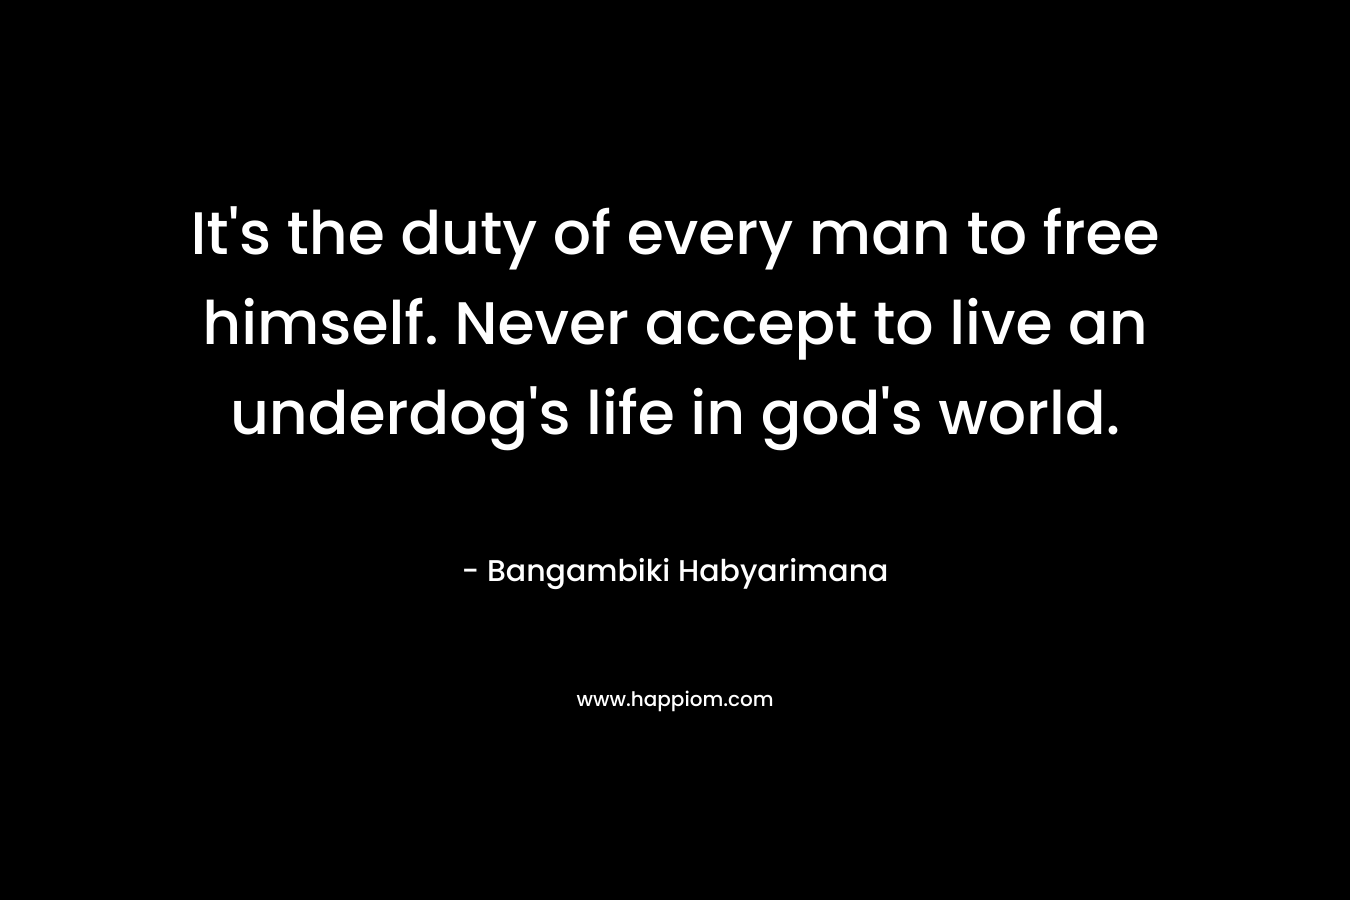 It's the duty of every man to free himself. Never accept to live an underdog's life in god's world.